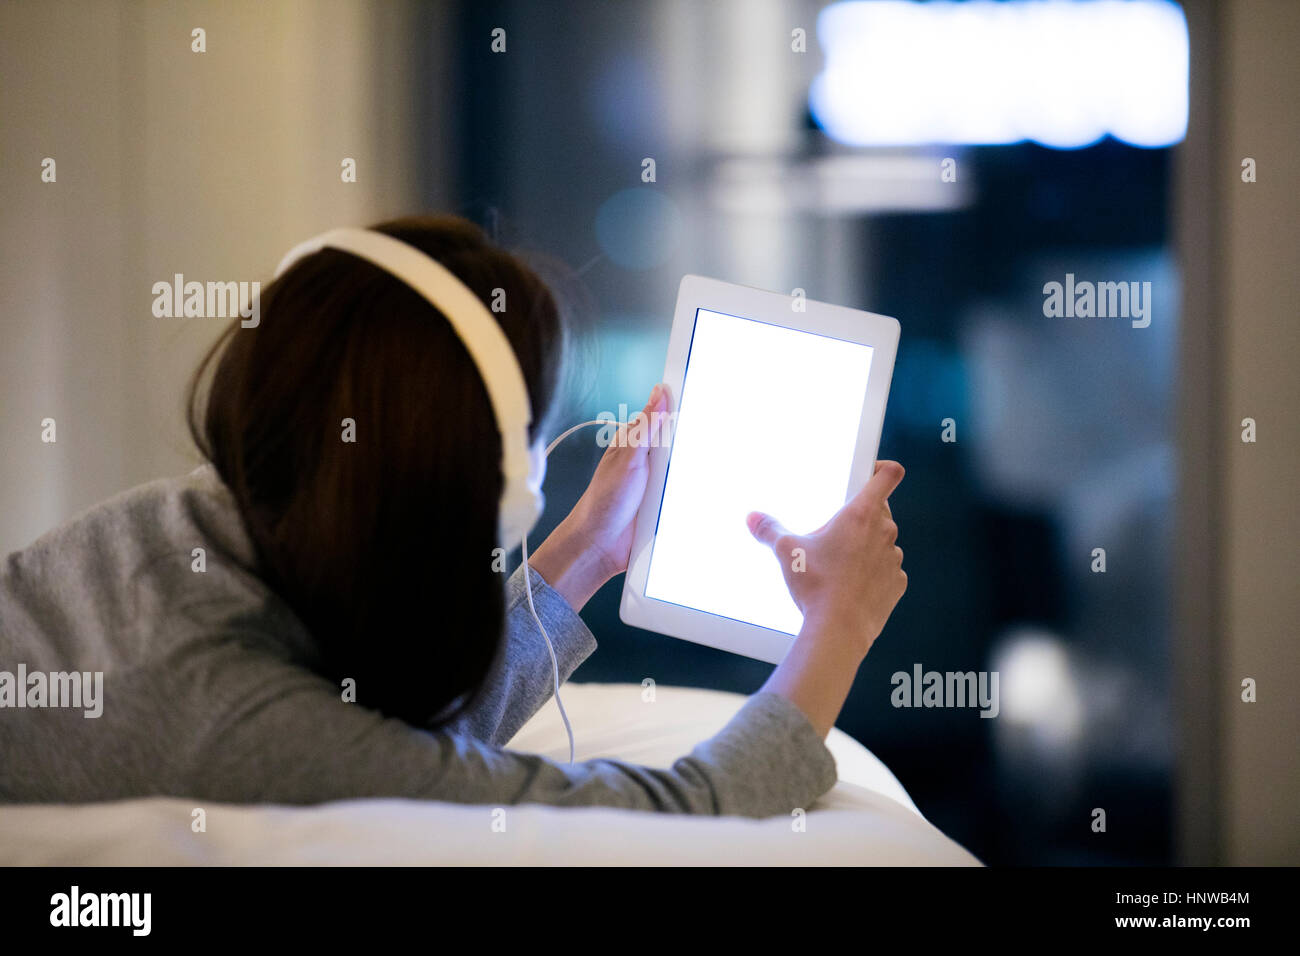 Young woman using tablet Stock Photo